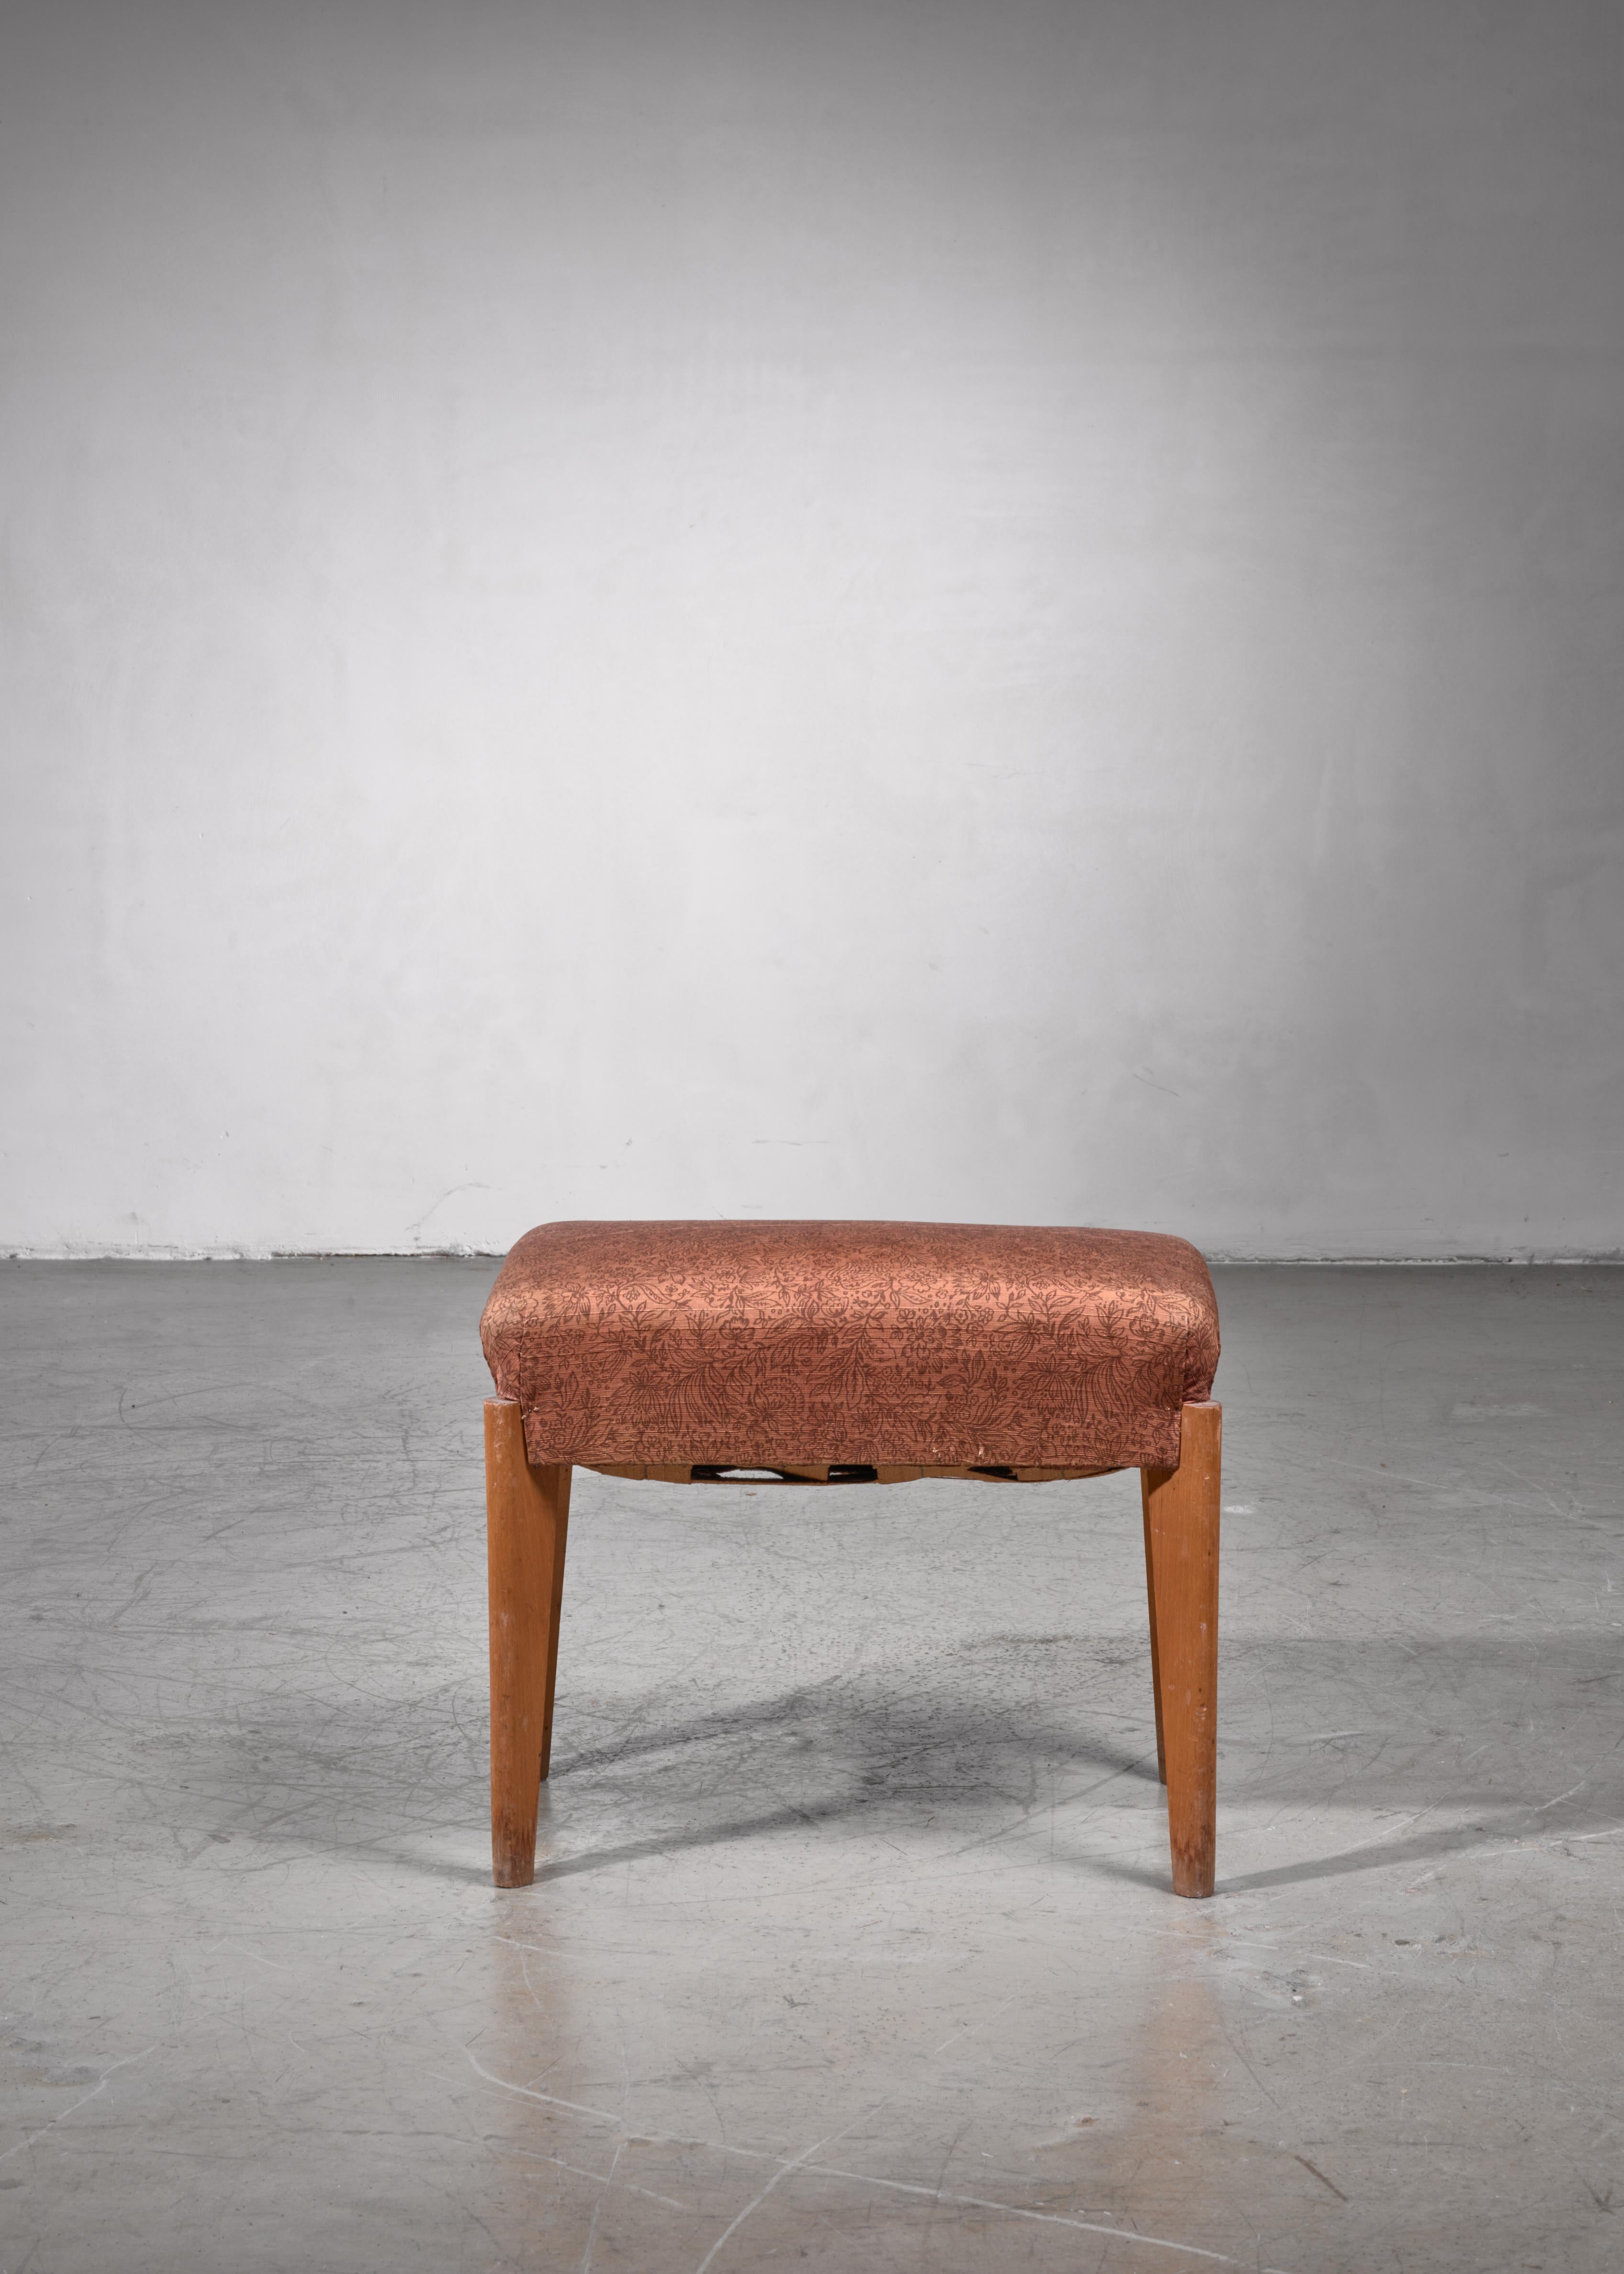 An early Modernist oak piano stool or ottoman l with a thick fabric seating and original upholstery.